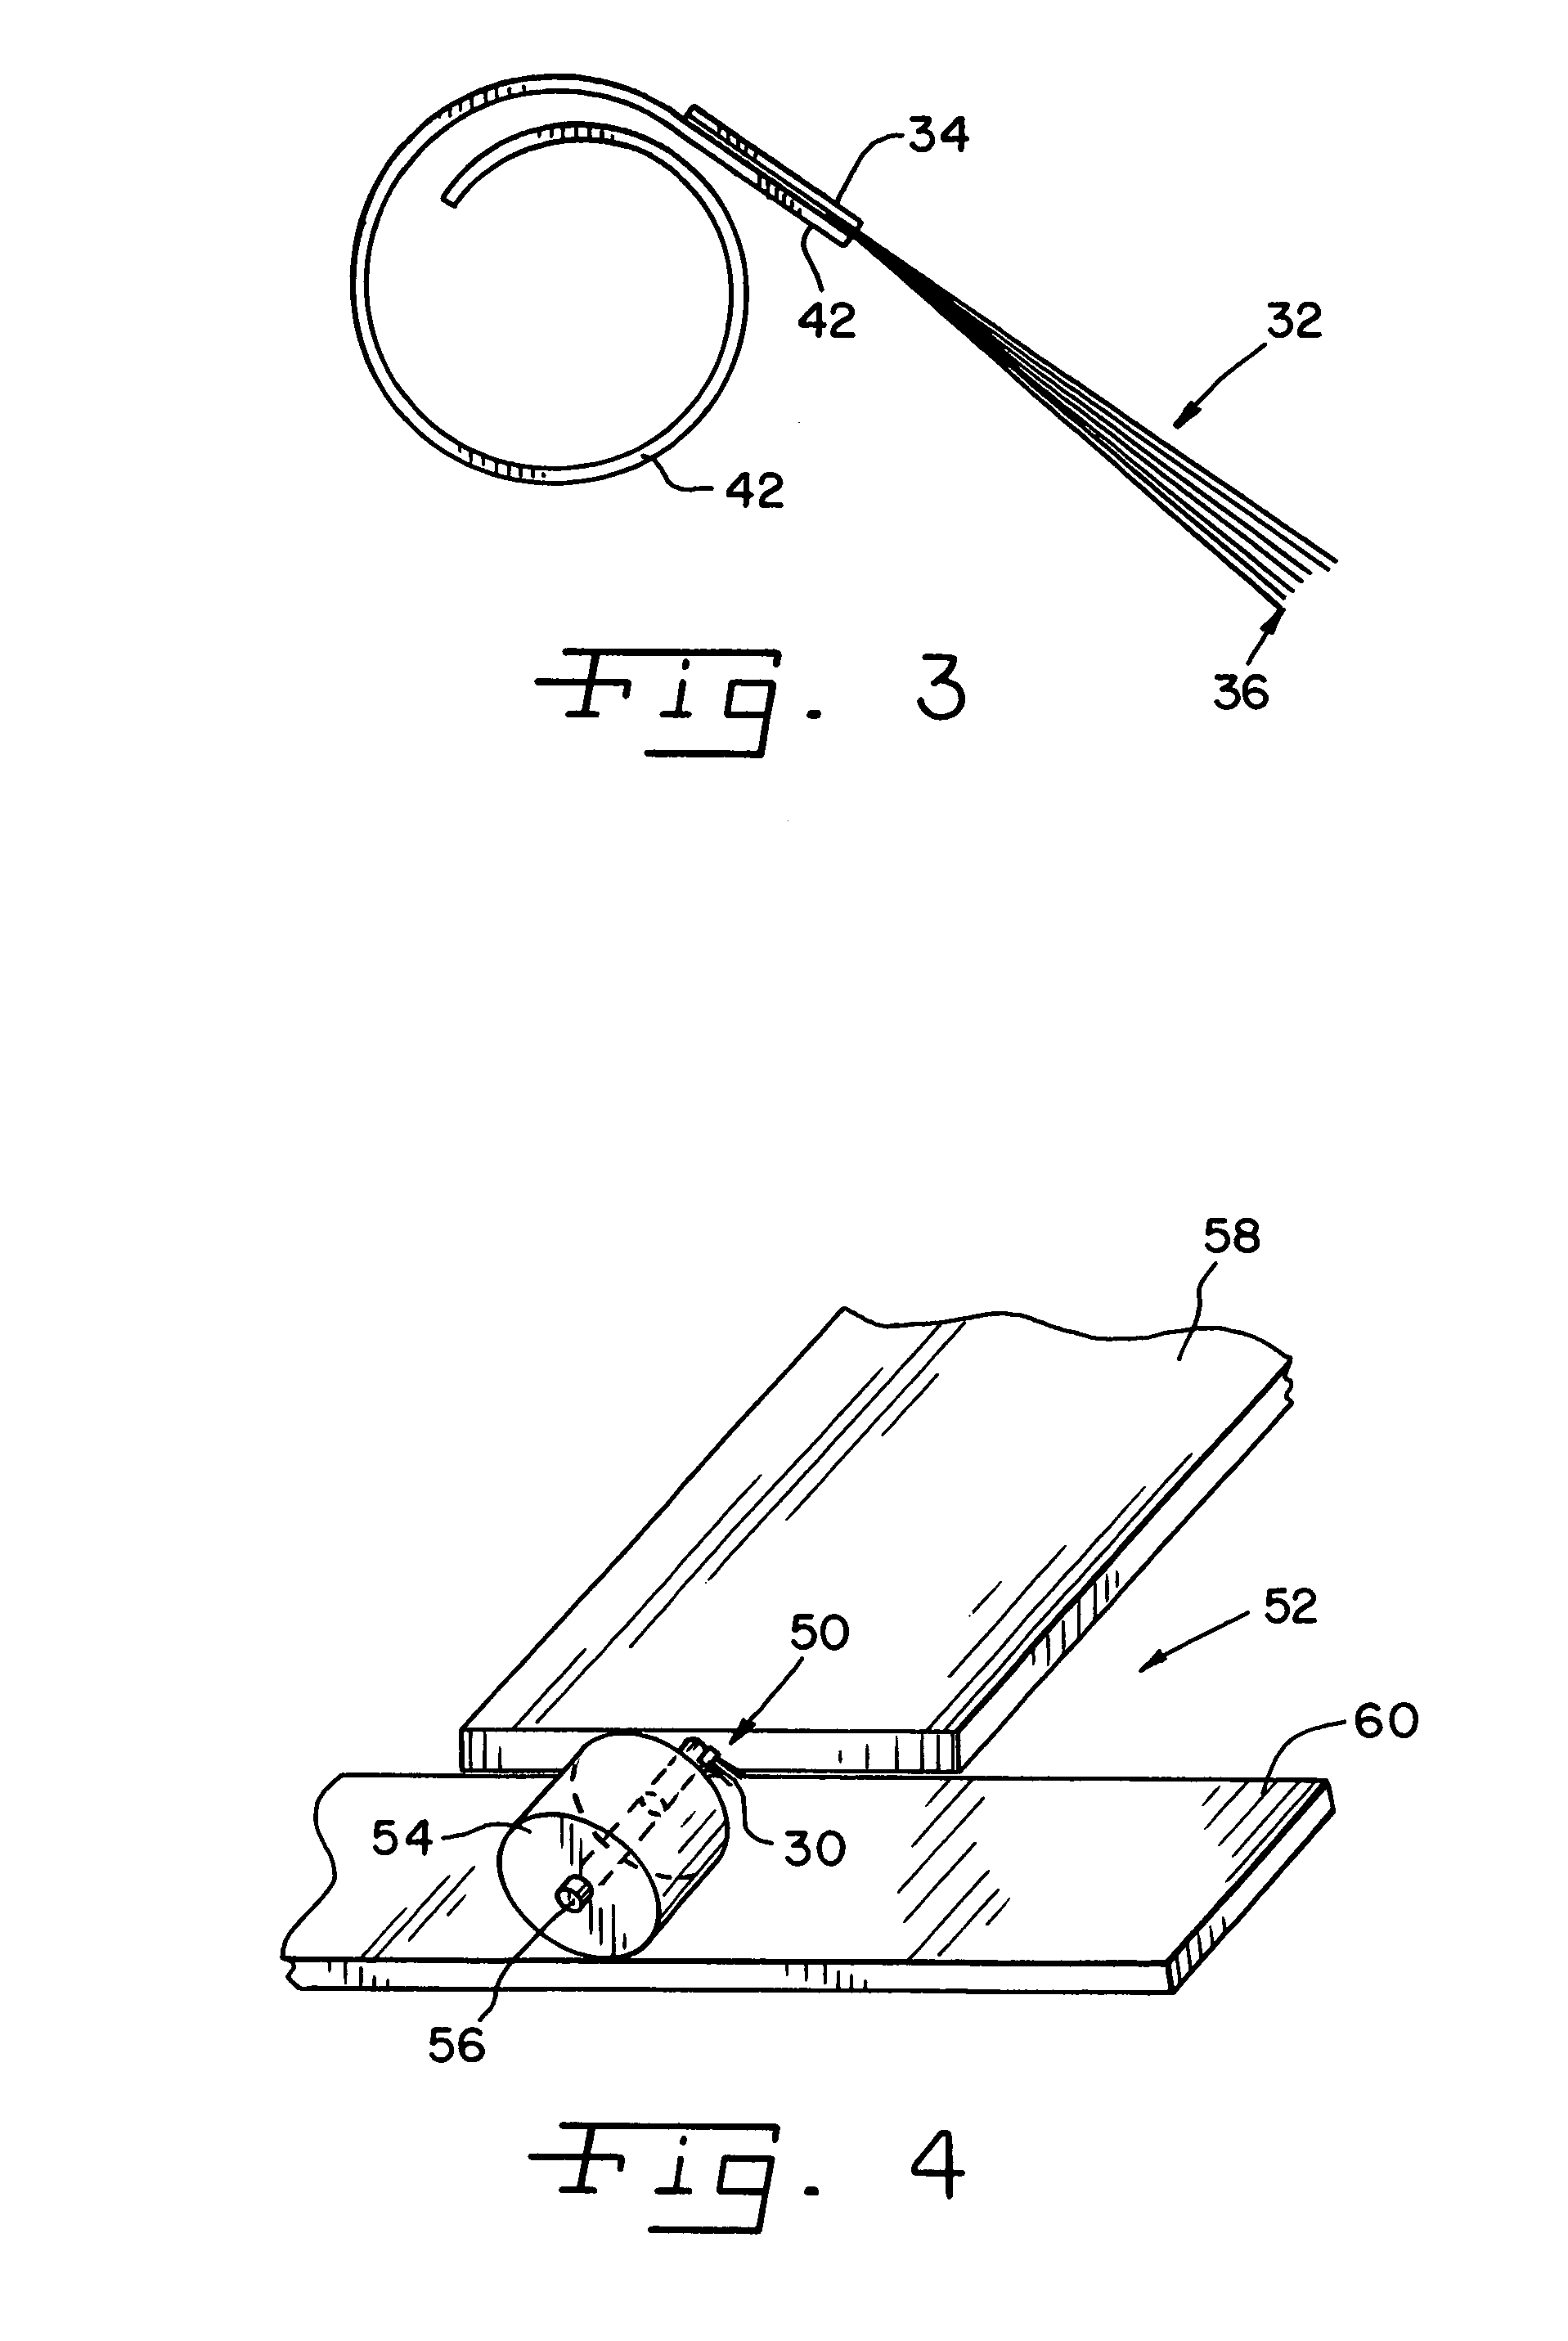 Static charge neutralizing assembly for use on rollers and shafts